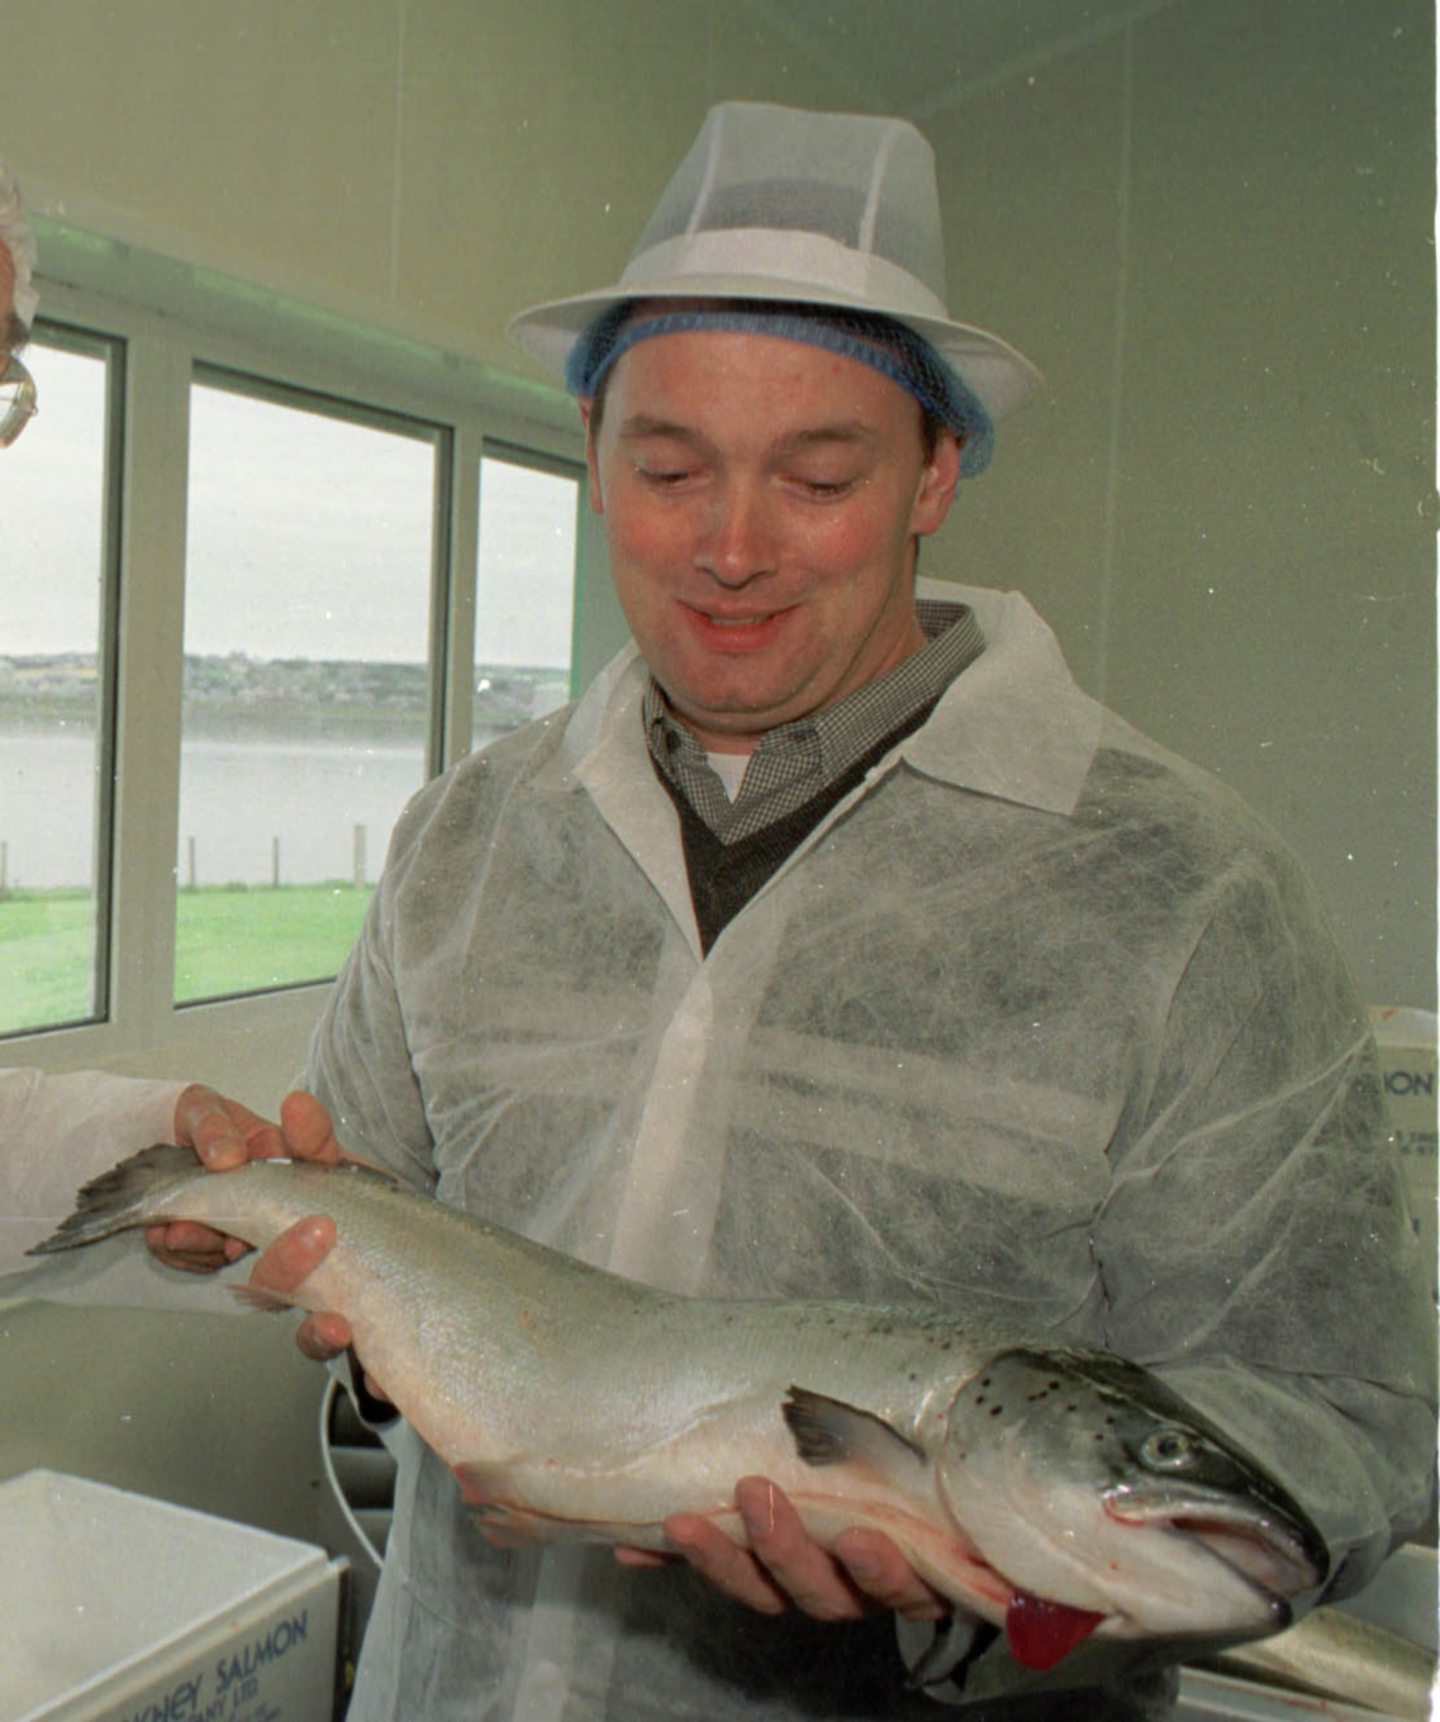 Cameron Stout, pictured holding a big fish, worked as a salmon dealer. Image: Ken Amer.